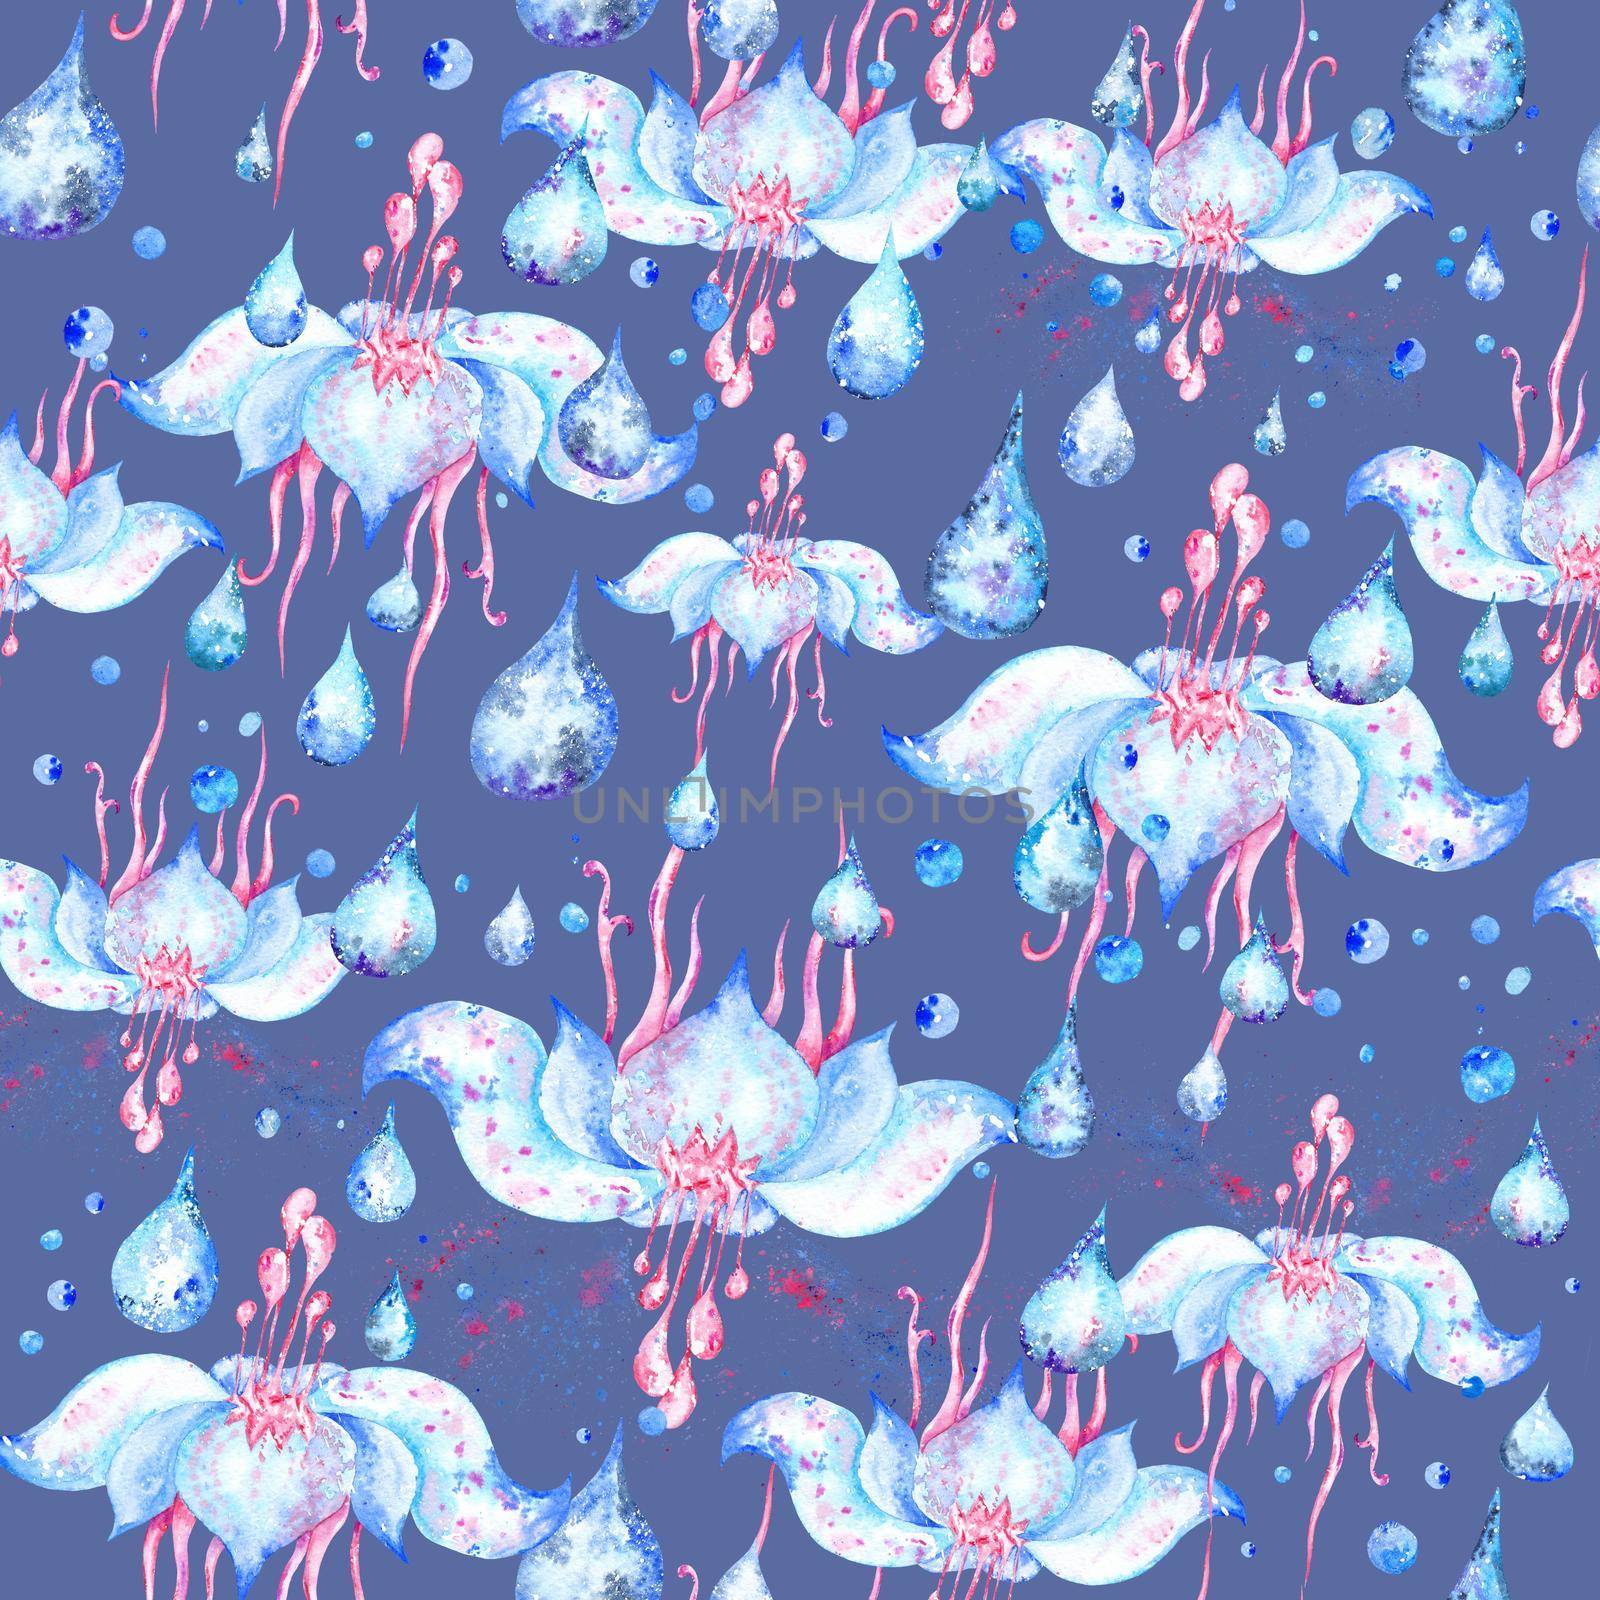 Watercolor seamless texture with lotus, water drops and color splash on blue background